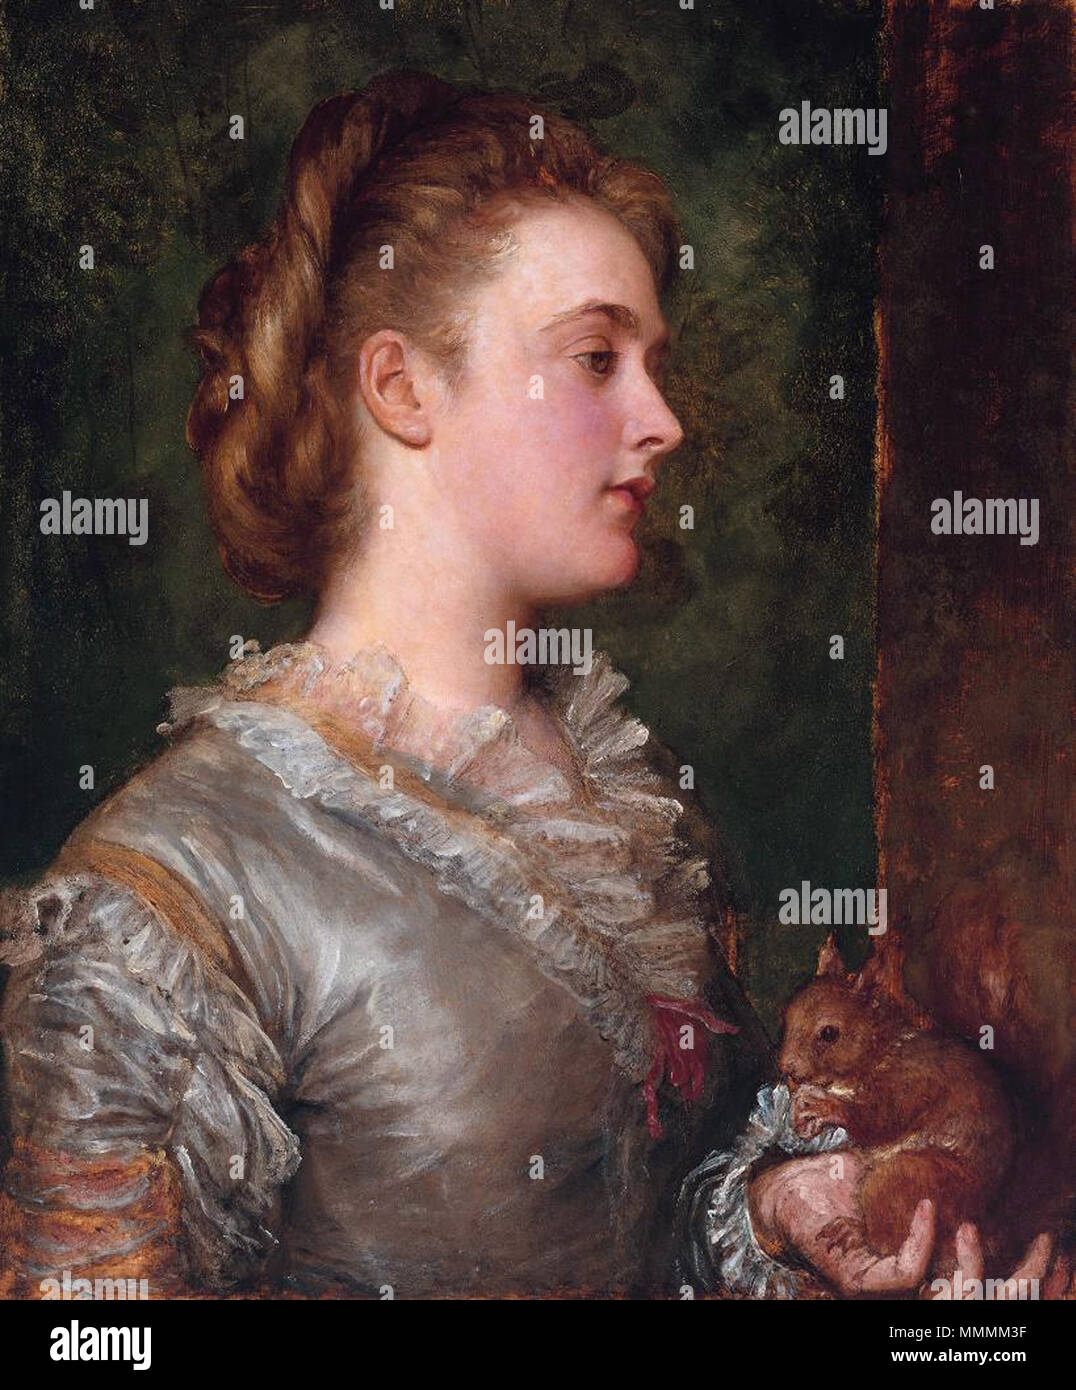 . English: Portrait Dorothy Tennant, Later Lady Stanley by George Frederick Watts (1817-1904)  . 5 September 2004.   George Frederic Watts  (1817–1904)      Description British painter and sculptor  Date of birth/death 23 February 1817 1 June 1904  Location of birth/death London Limnerslease bei Compton (Surrey)  Work location London, Florence, Paris, Konstantinopel  Authority control  : Q183245 VIAF:?10095477 ISNI:?0000 0000 8076 3251 ULAN:?500026988 LCCN:?n50043705 NLA:?35594706 WorldCat Dorothy Tennant 002 Stock Photo